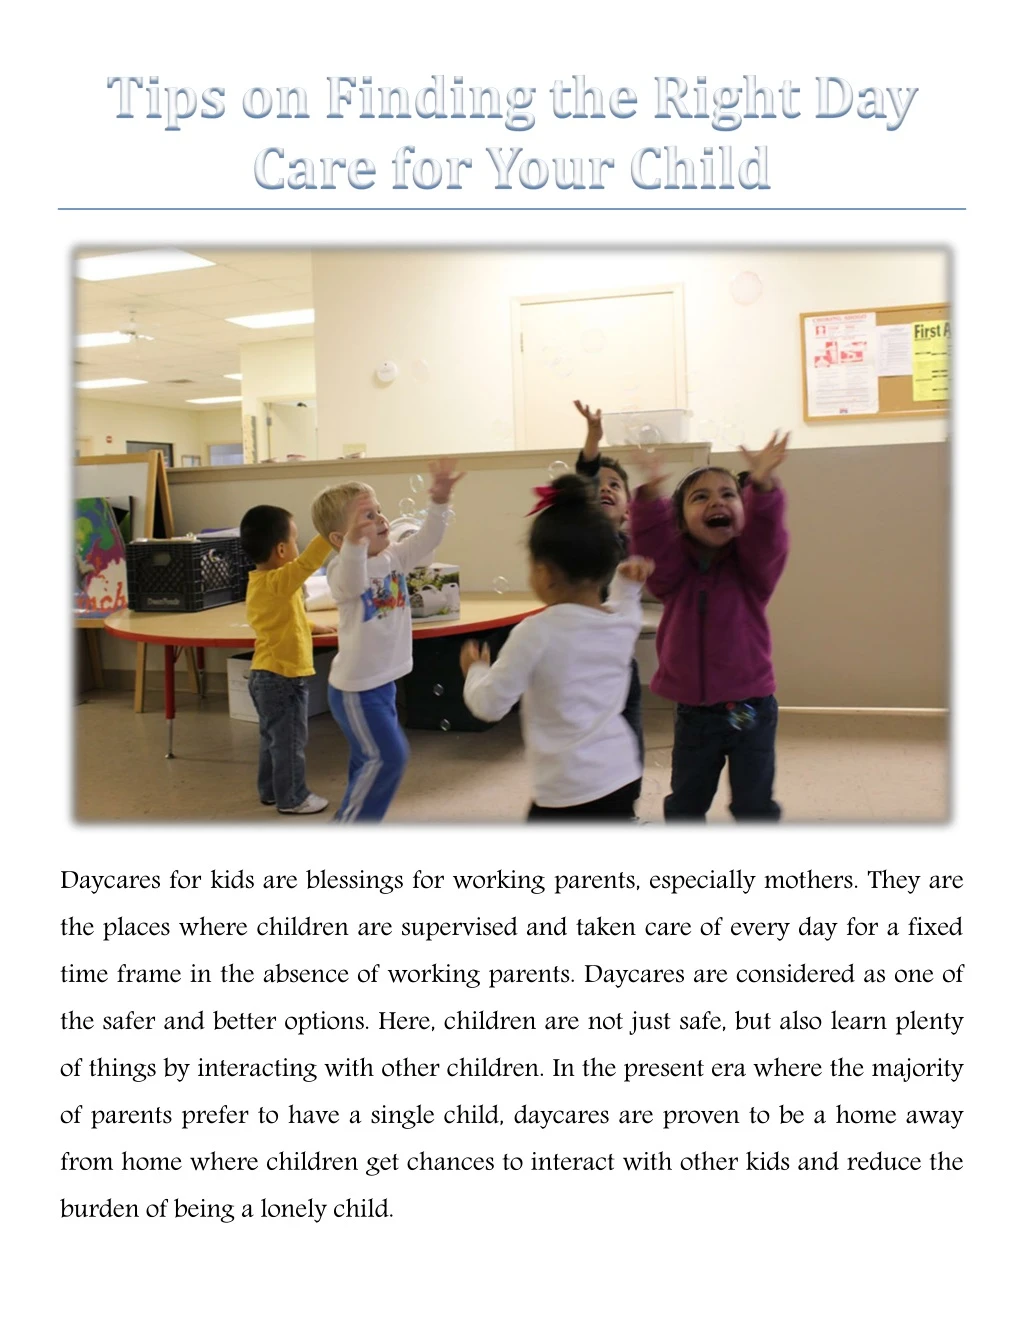 daycares for kids are blessings for working